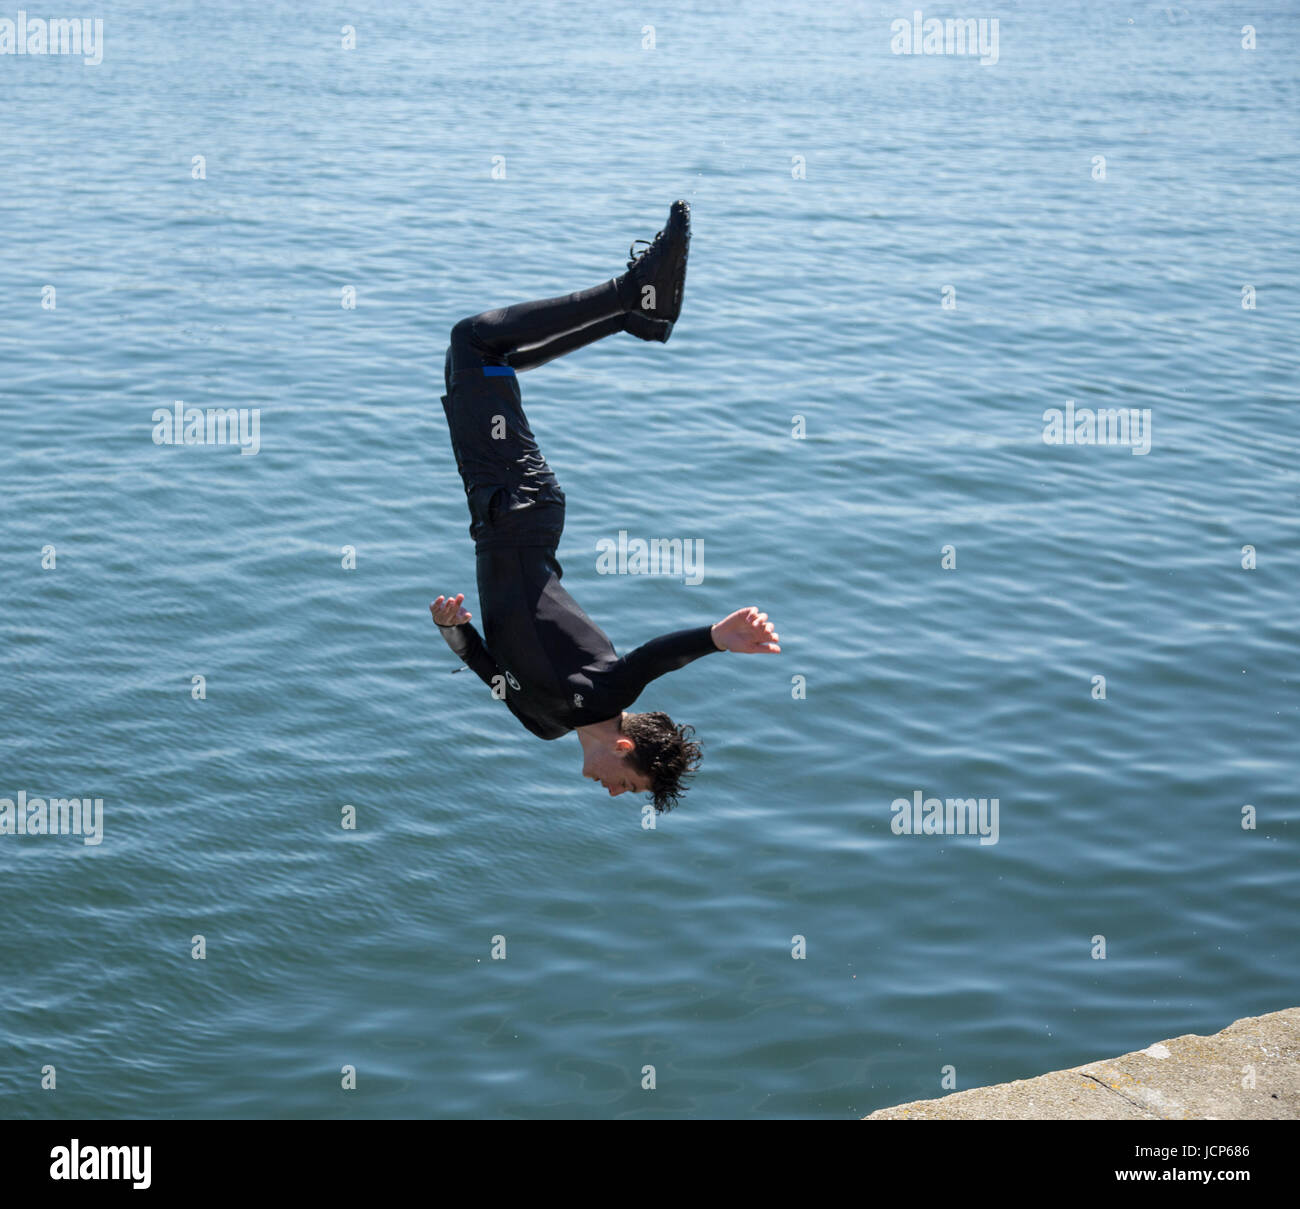 Plymouth, Devon, 17th June 17 - Young swimmers cool off by diving into the water at Barbican Wharves, Plymouth.  Credit: South West Photos/Alamy Live News Stock Photo